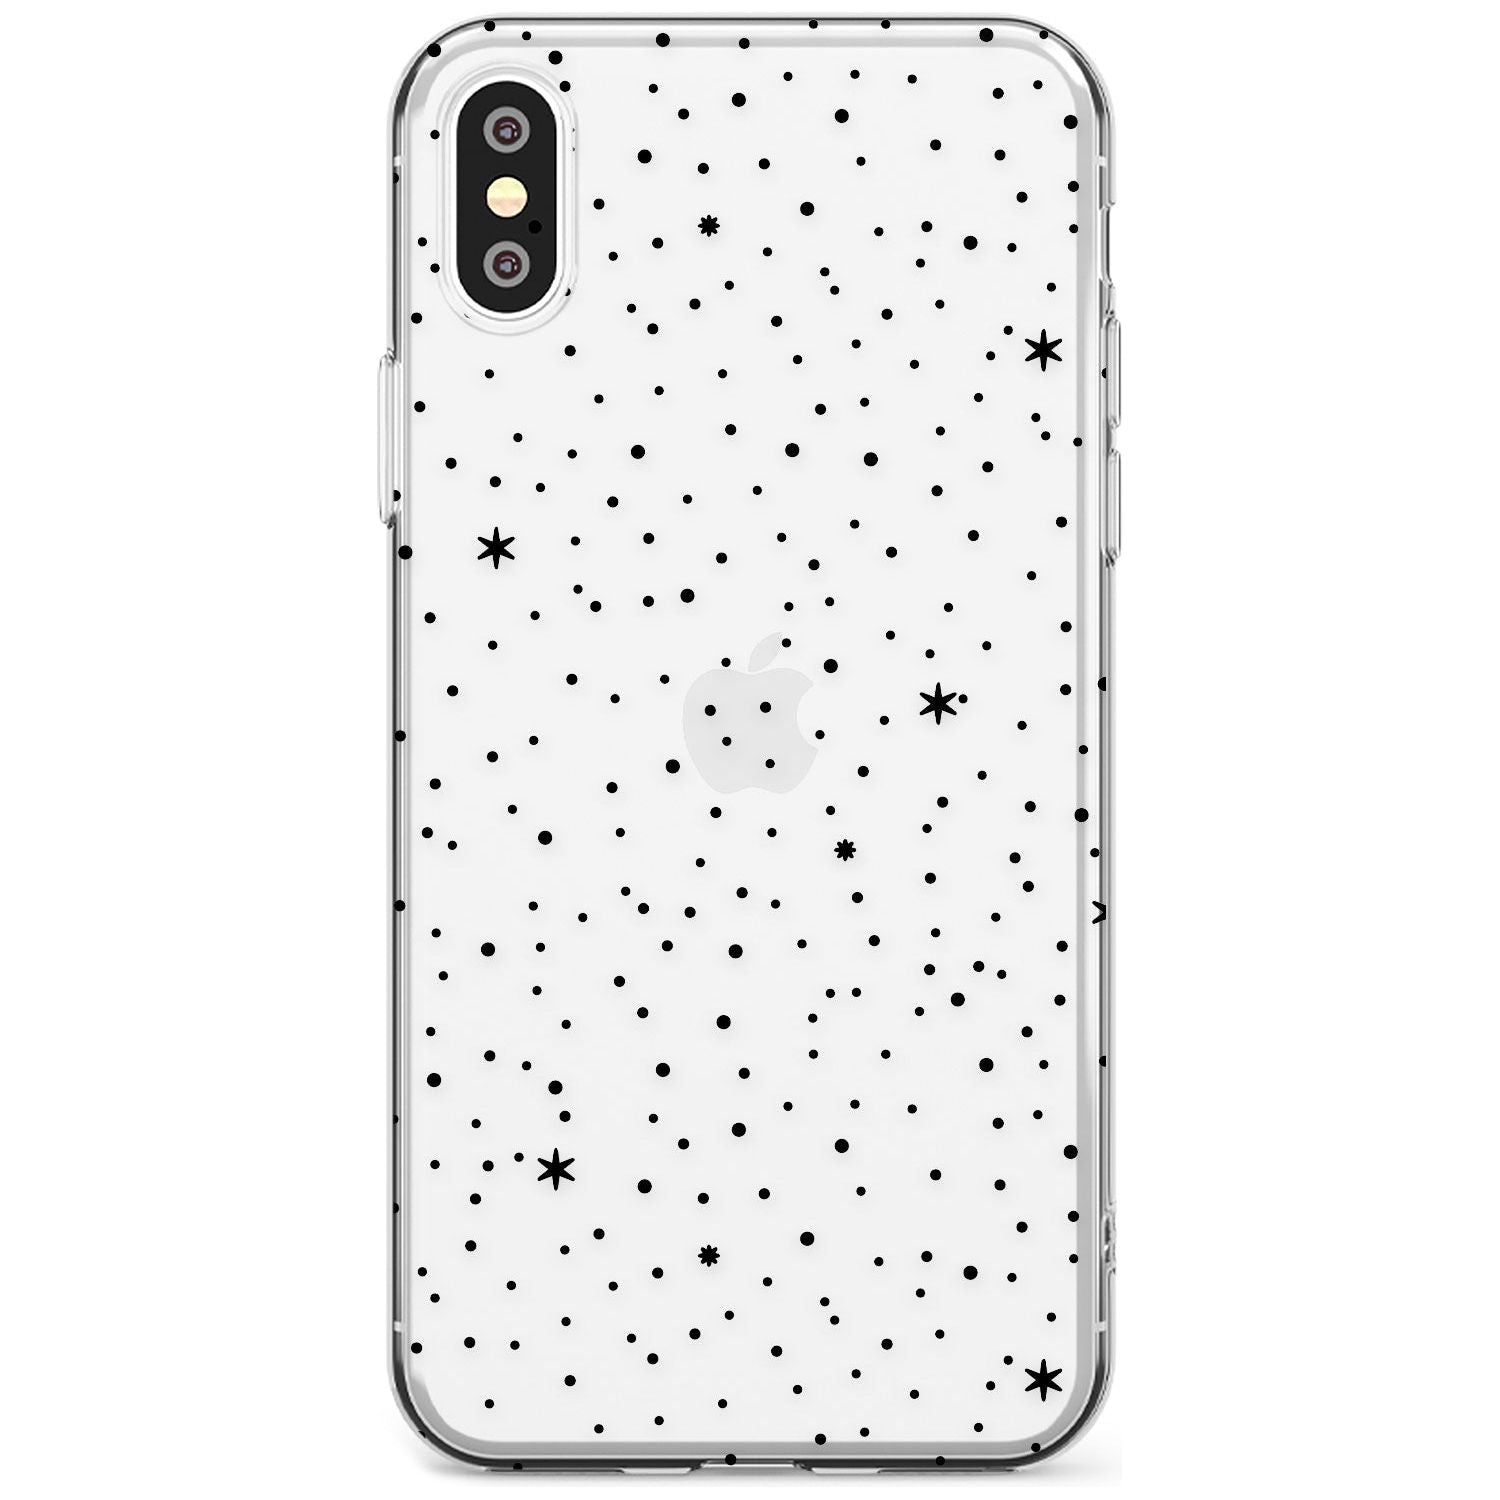 Celestial Starry Sky Black Impact Phone Case for iPhone X XS Max XR